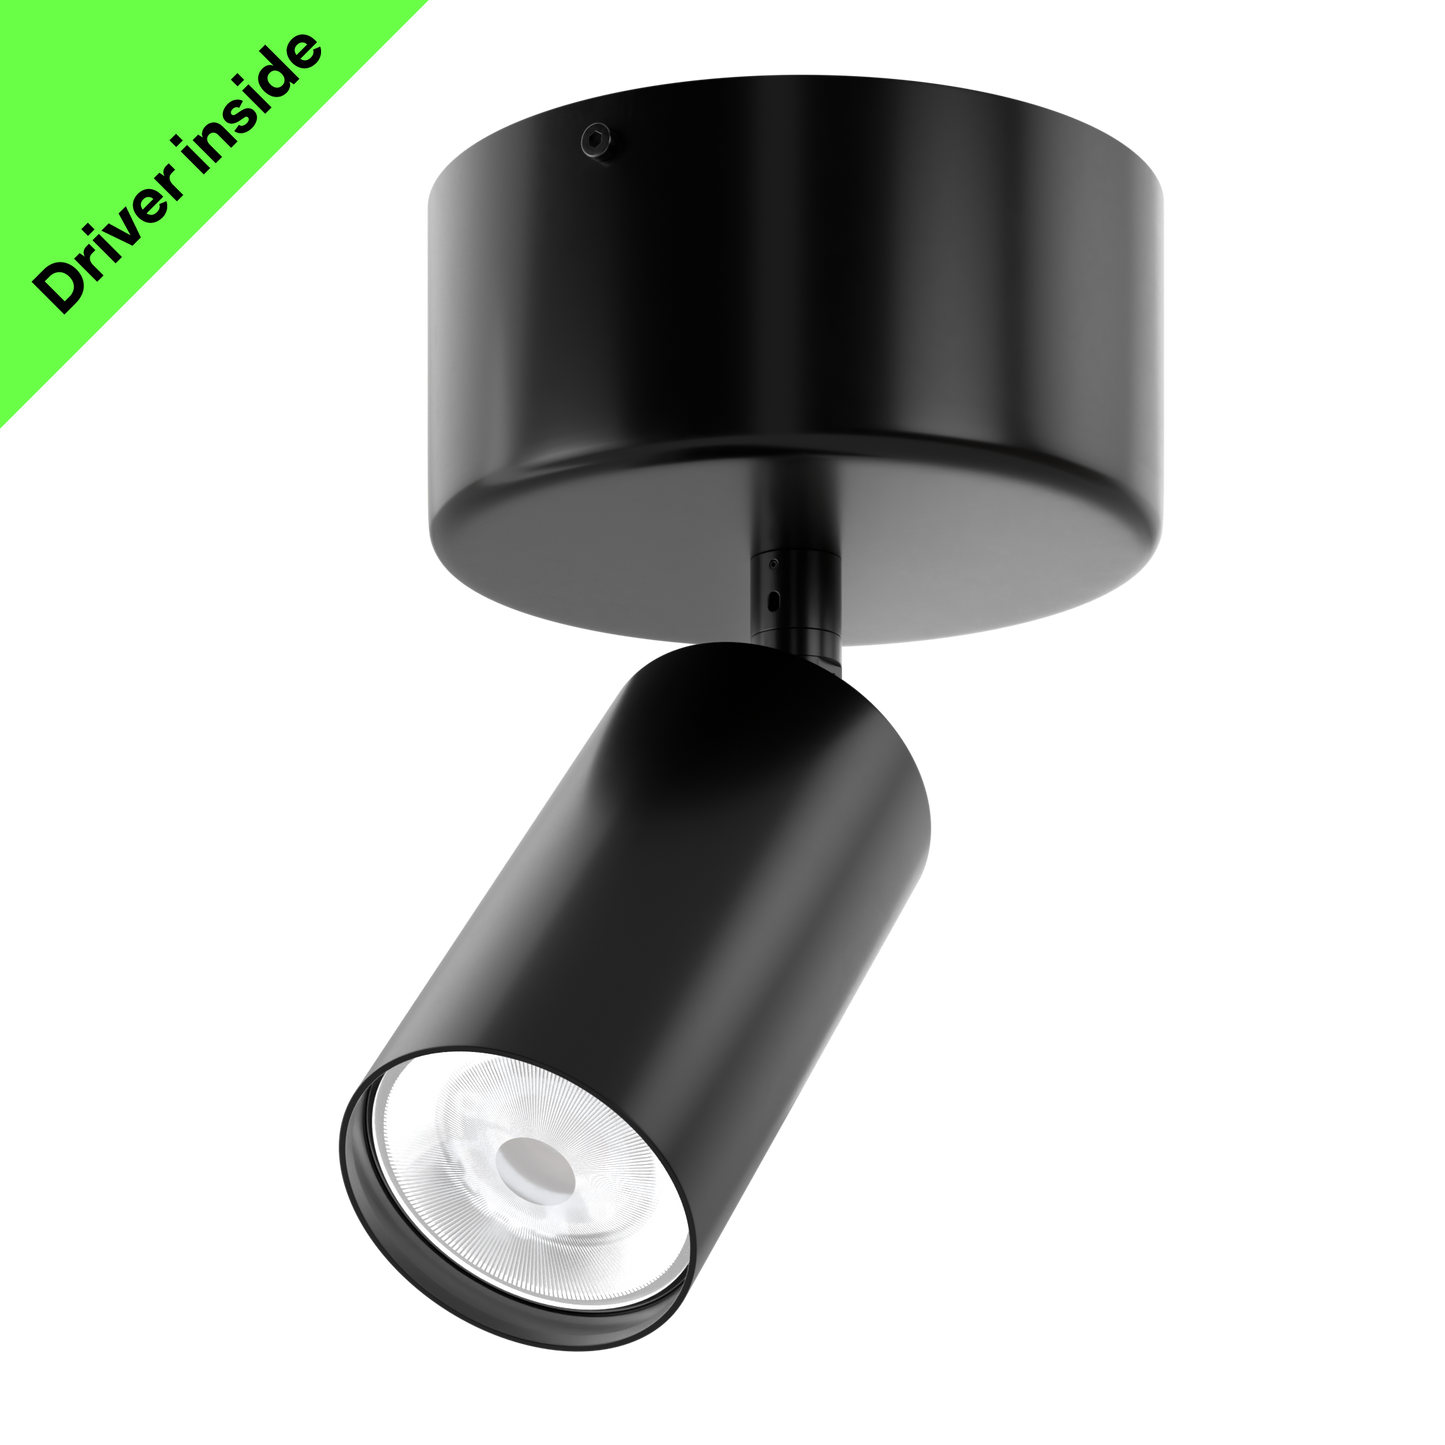 A sustainable, black, architectural spotlight on a large monopoint with integral driver that's designed for circular economy